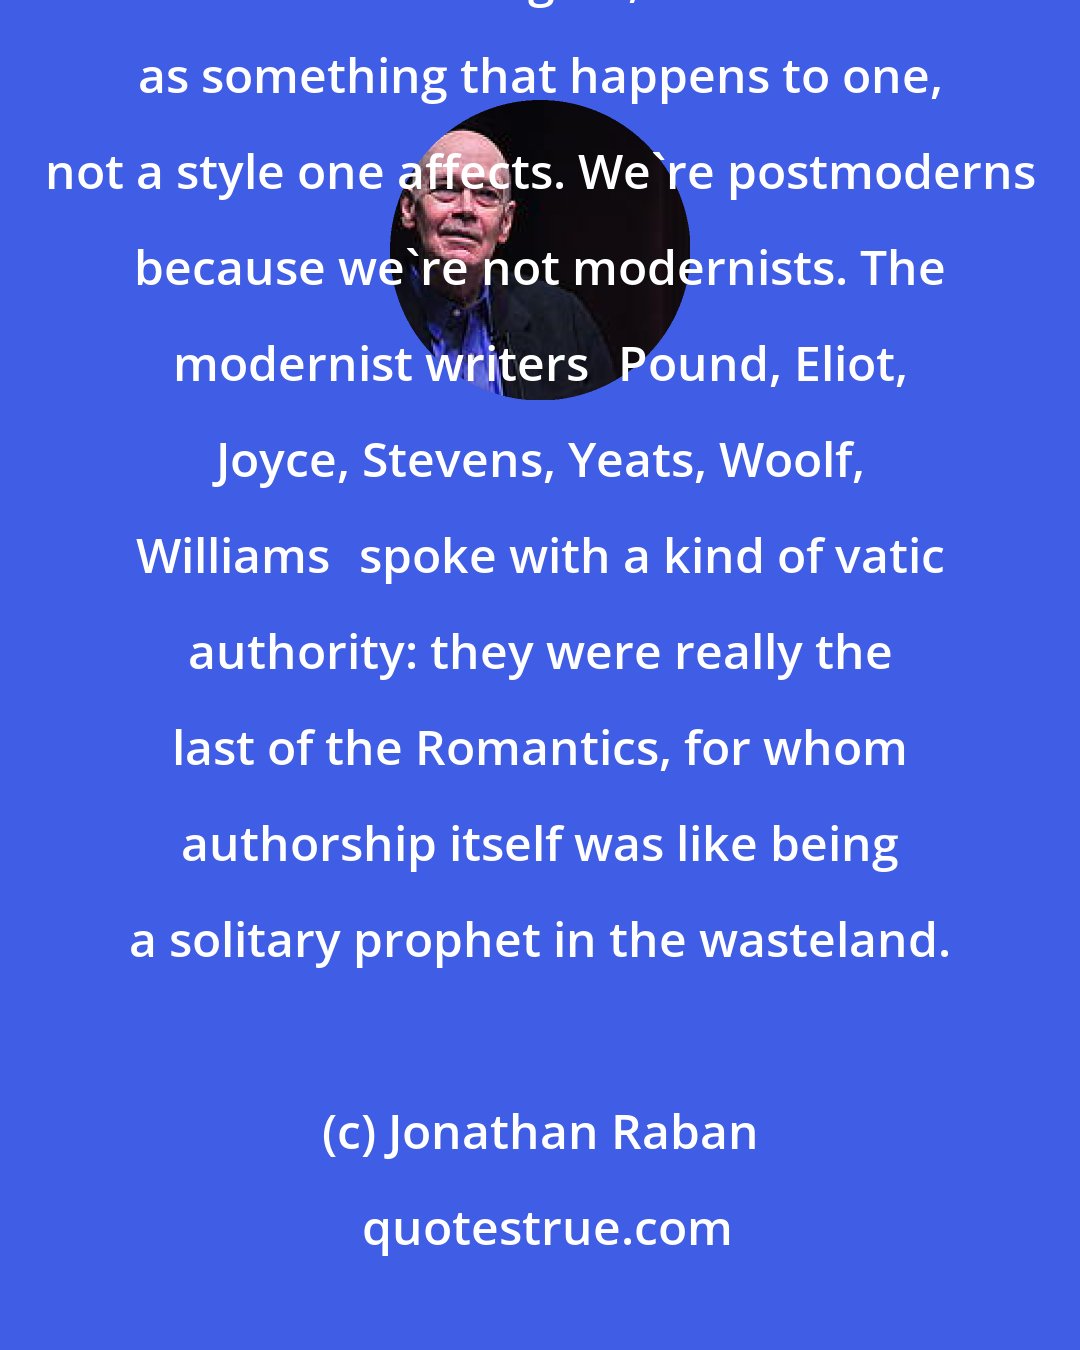 Jonathan Raban: Insofar as I think about postmodernism at all, and it doesn't exactly keep me awake at nights, I think of it as something that happens to one, not a style one affects. We're postmoderns because we're not modernists. The modernist writersPound, Eliot, Joyce, Stevens, Yeats, Woolf, Williamsspoke with a kind of vatic authority: they were really the last of the Romantics, for whom authorship itself was like being a solitary prophet in the wasteland.